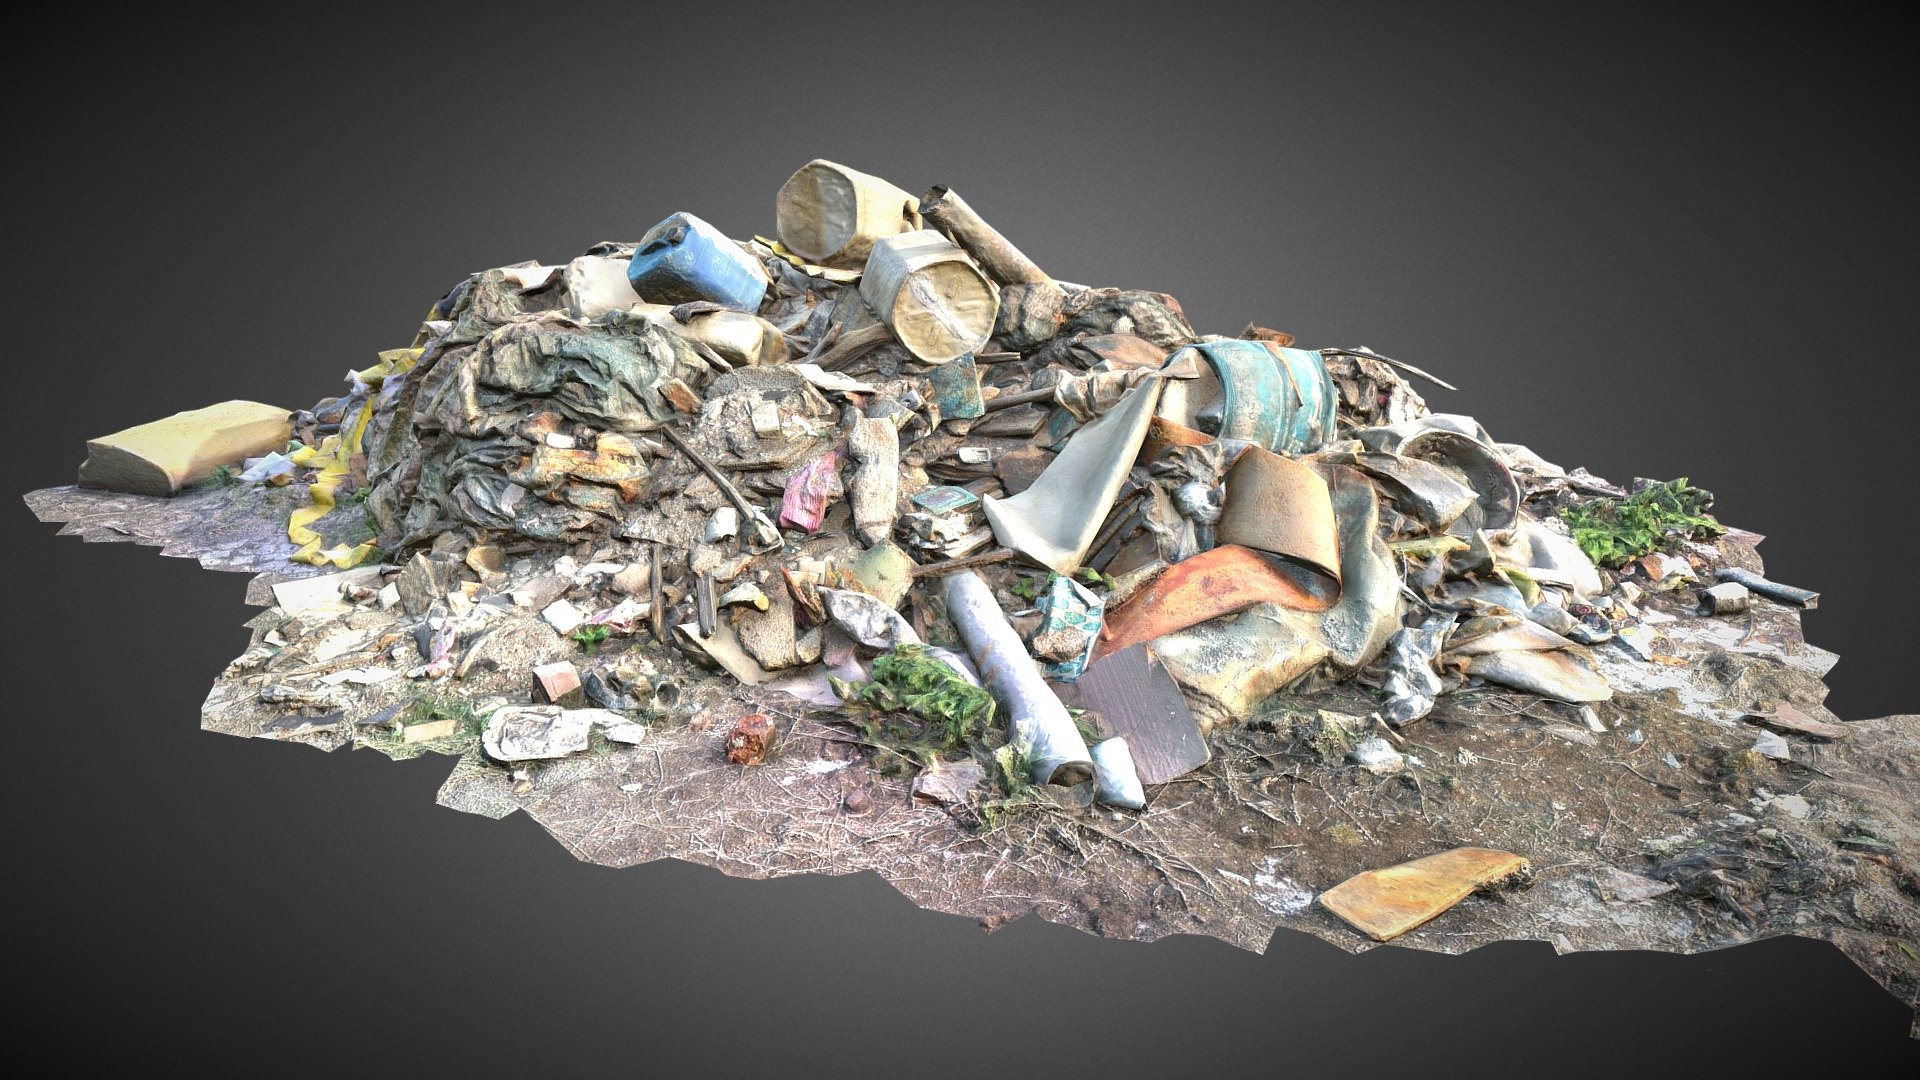 Some garbage found around an abandonned casern in Berlin. Low poly, game ready asset. 4k PBR textures sets. (delighted albedo)
Perfect to fill the ground of your scene to boost its realism. Original Raw scan model with two diffuse 4k textures available in additionnal files, just to make sure you get the best of this asset 3d model